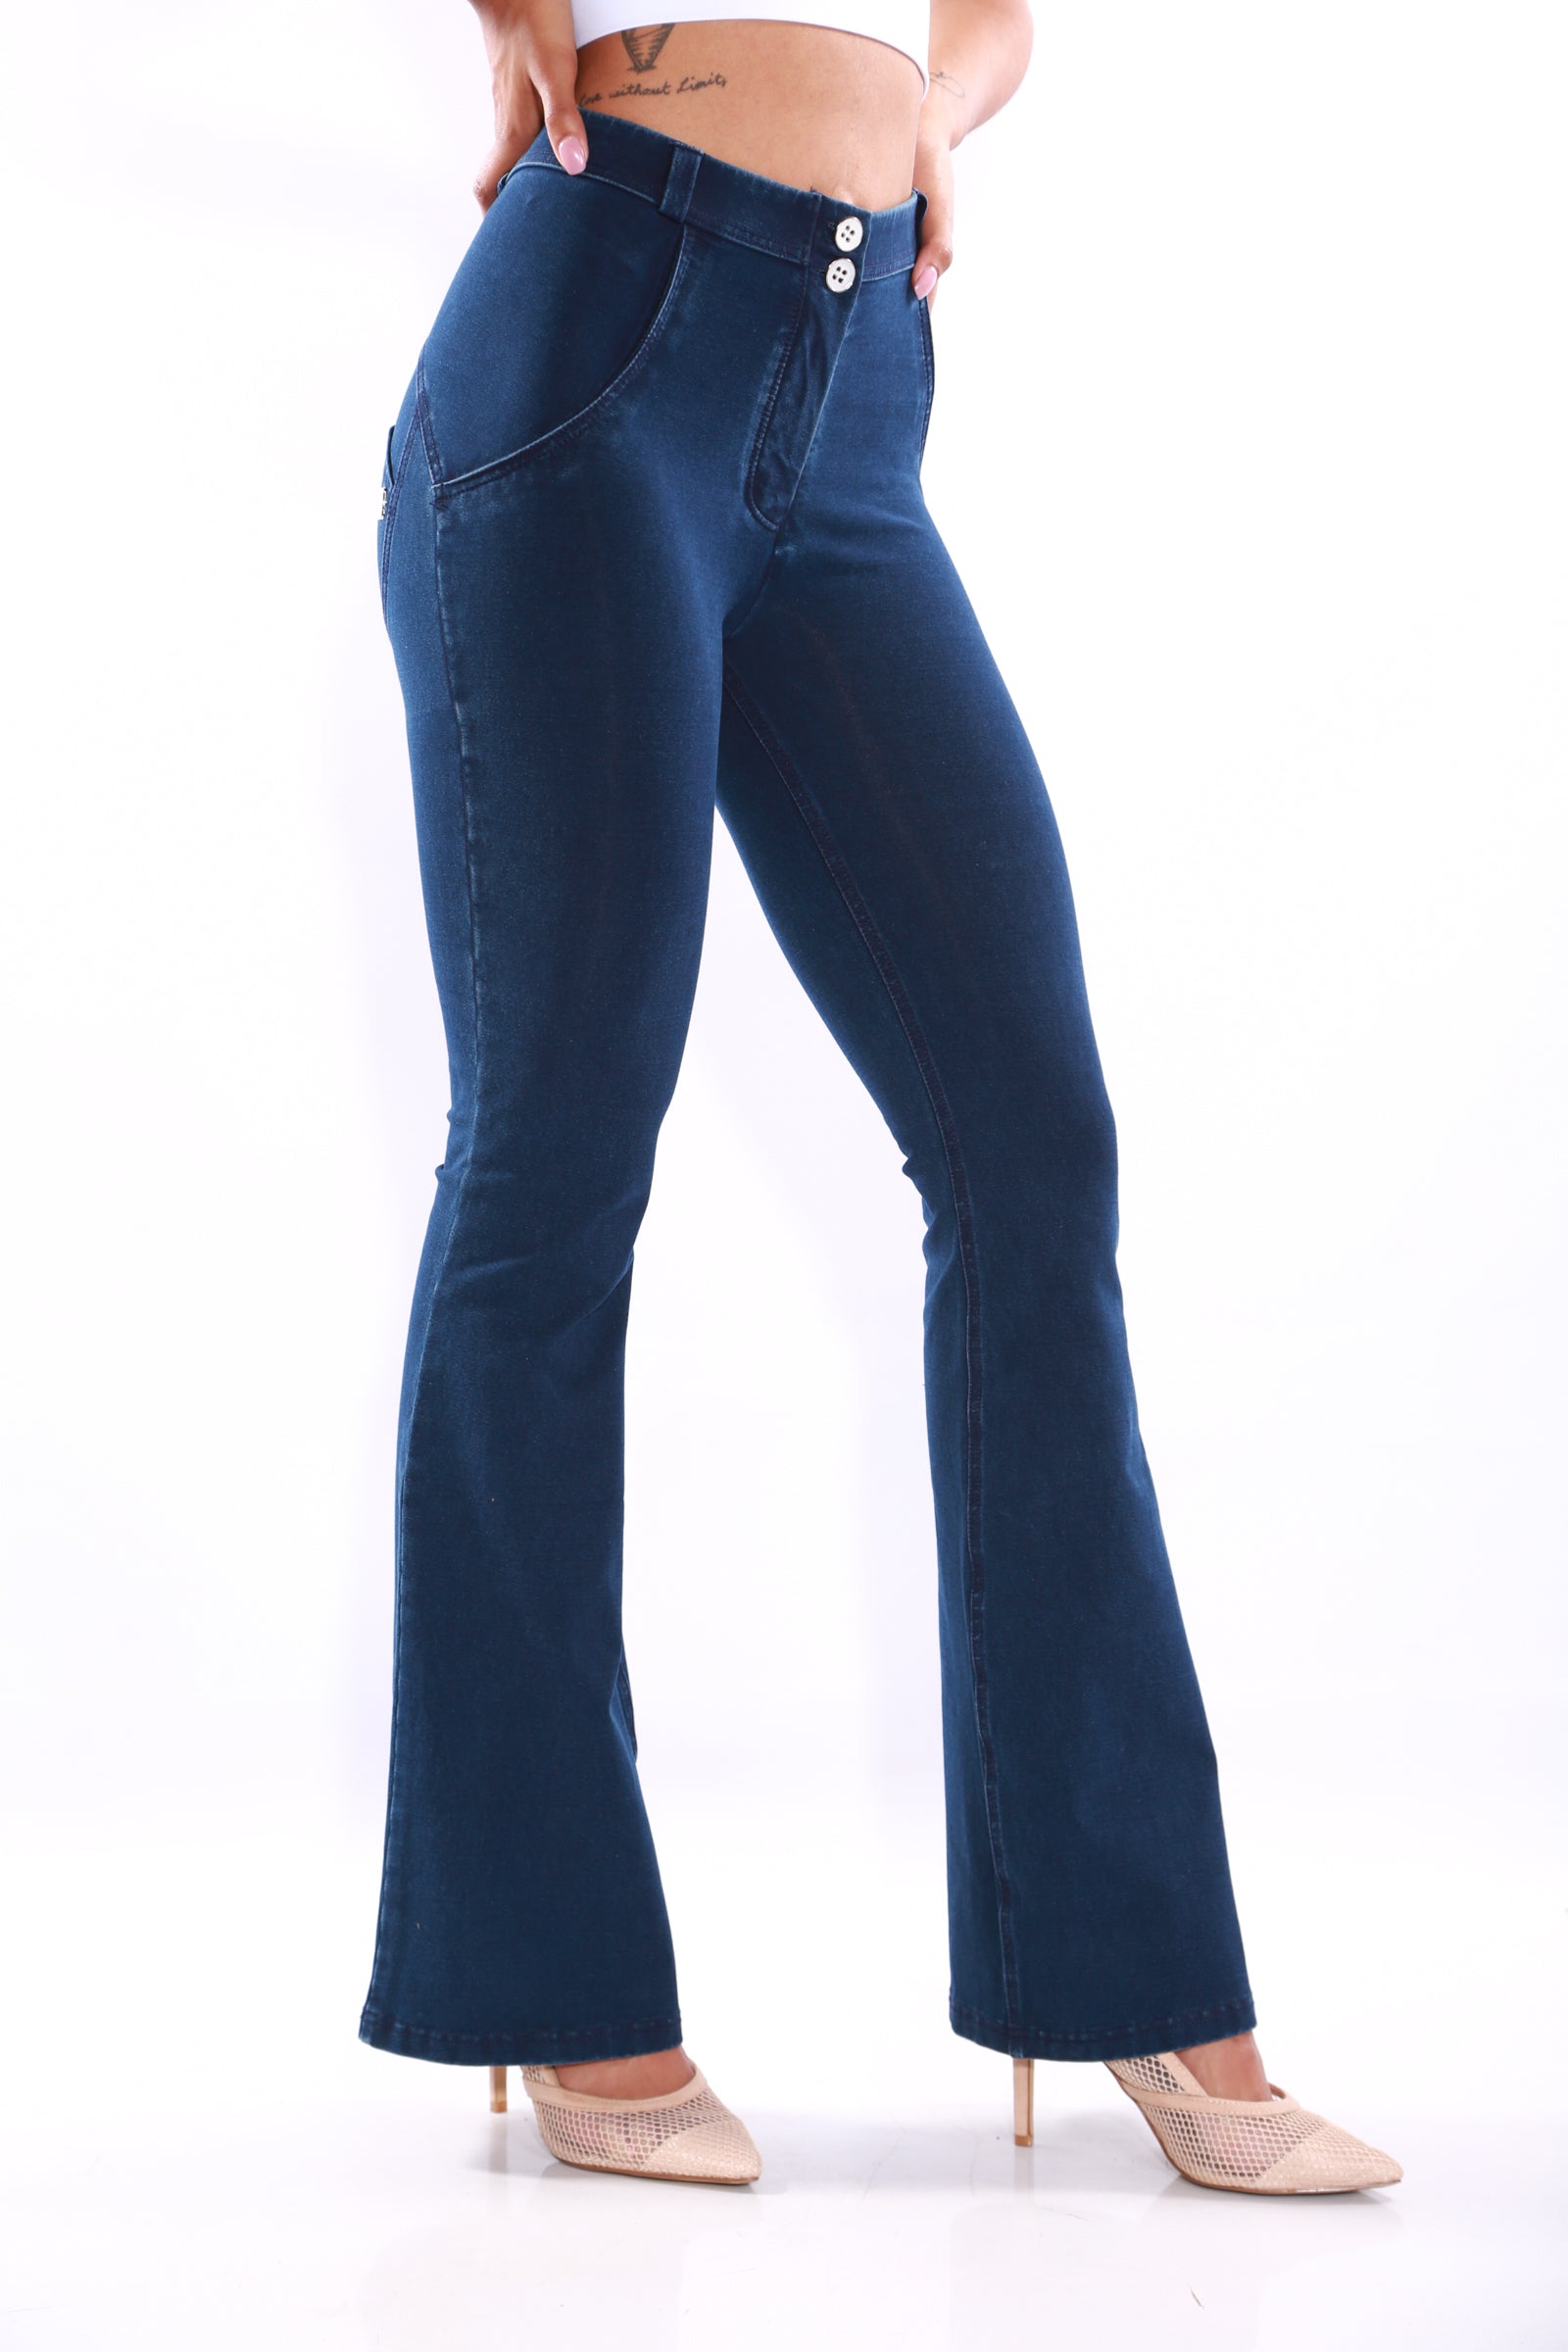 Image of Mid waist Bootleg Butt lifting Shaping Jeans/Jeggings - Dark Blue